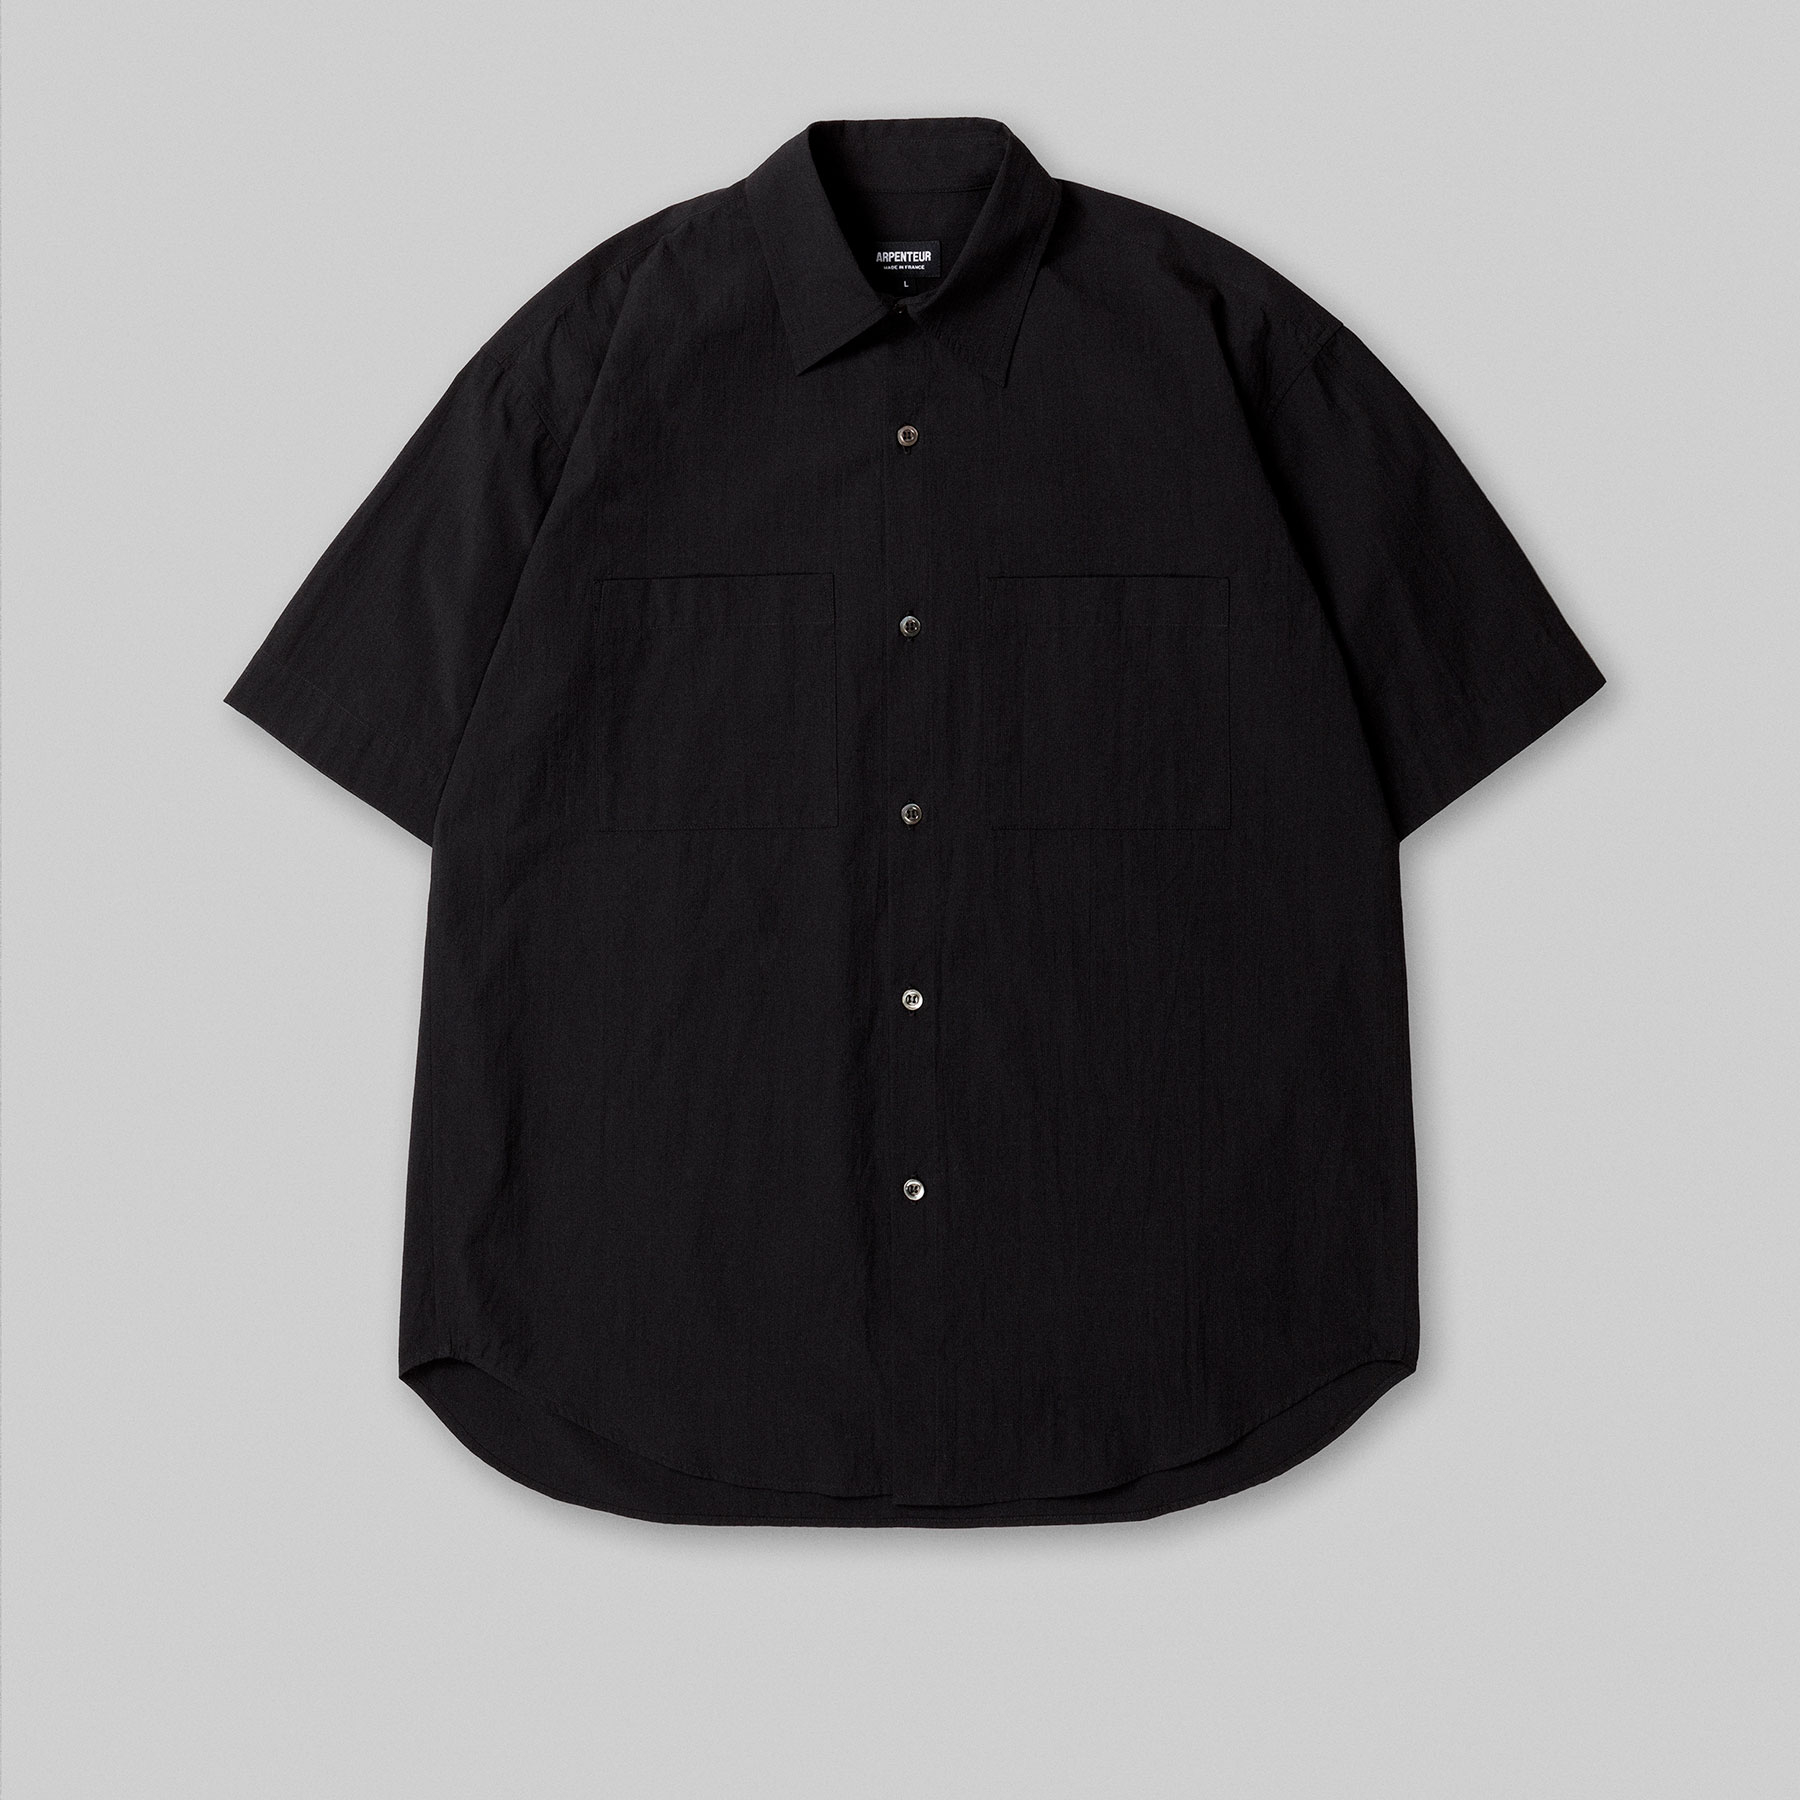 STEREO shirt by Arpenteur in Black color